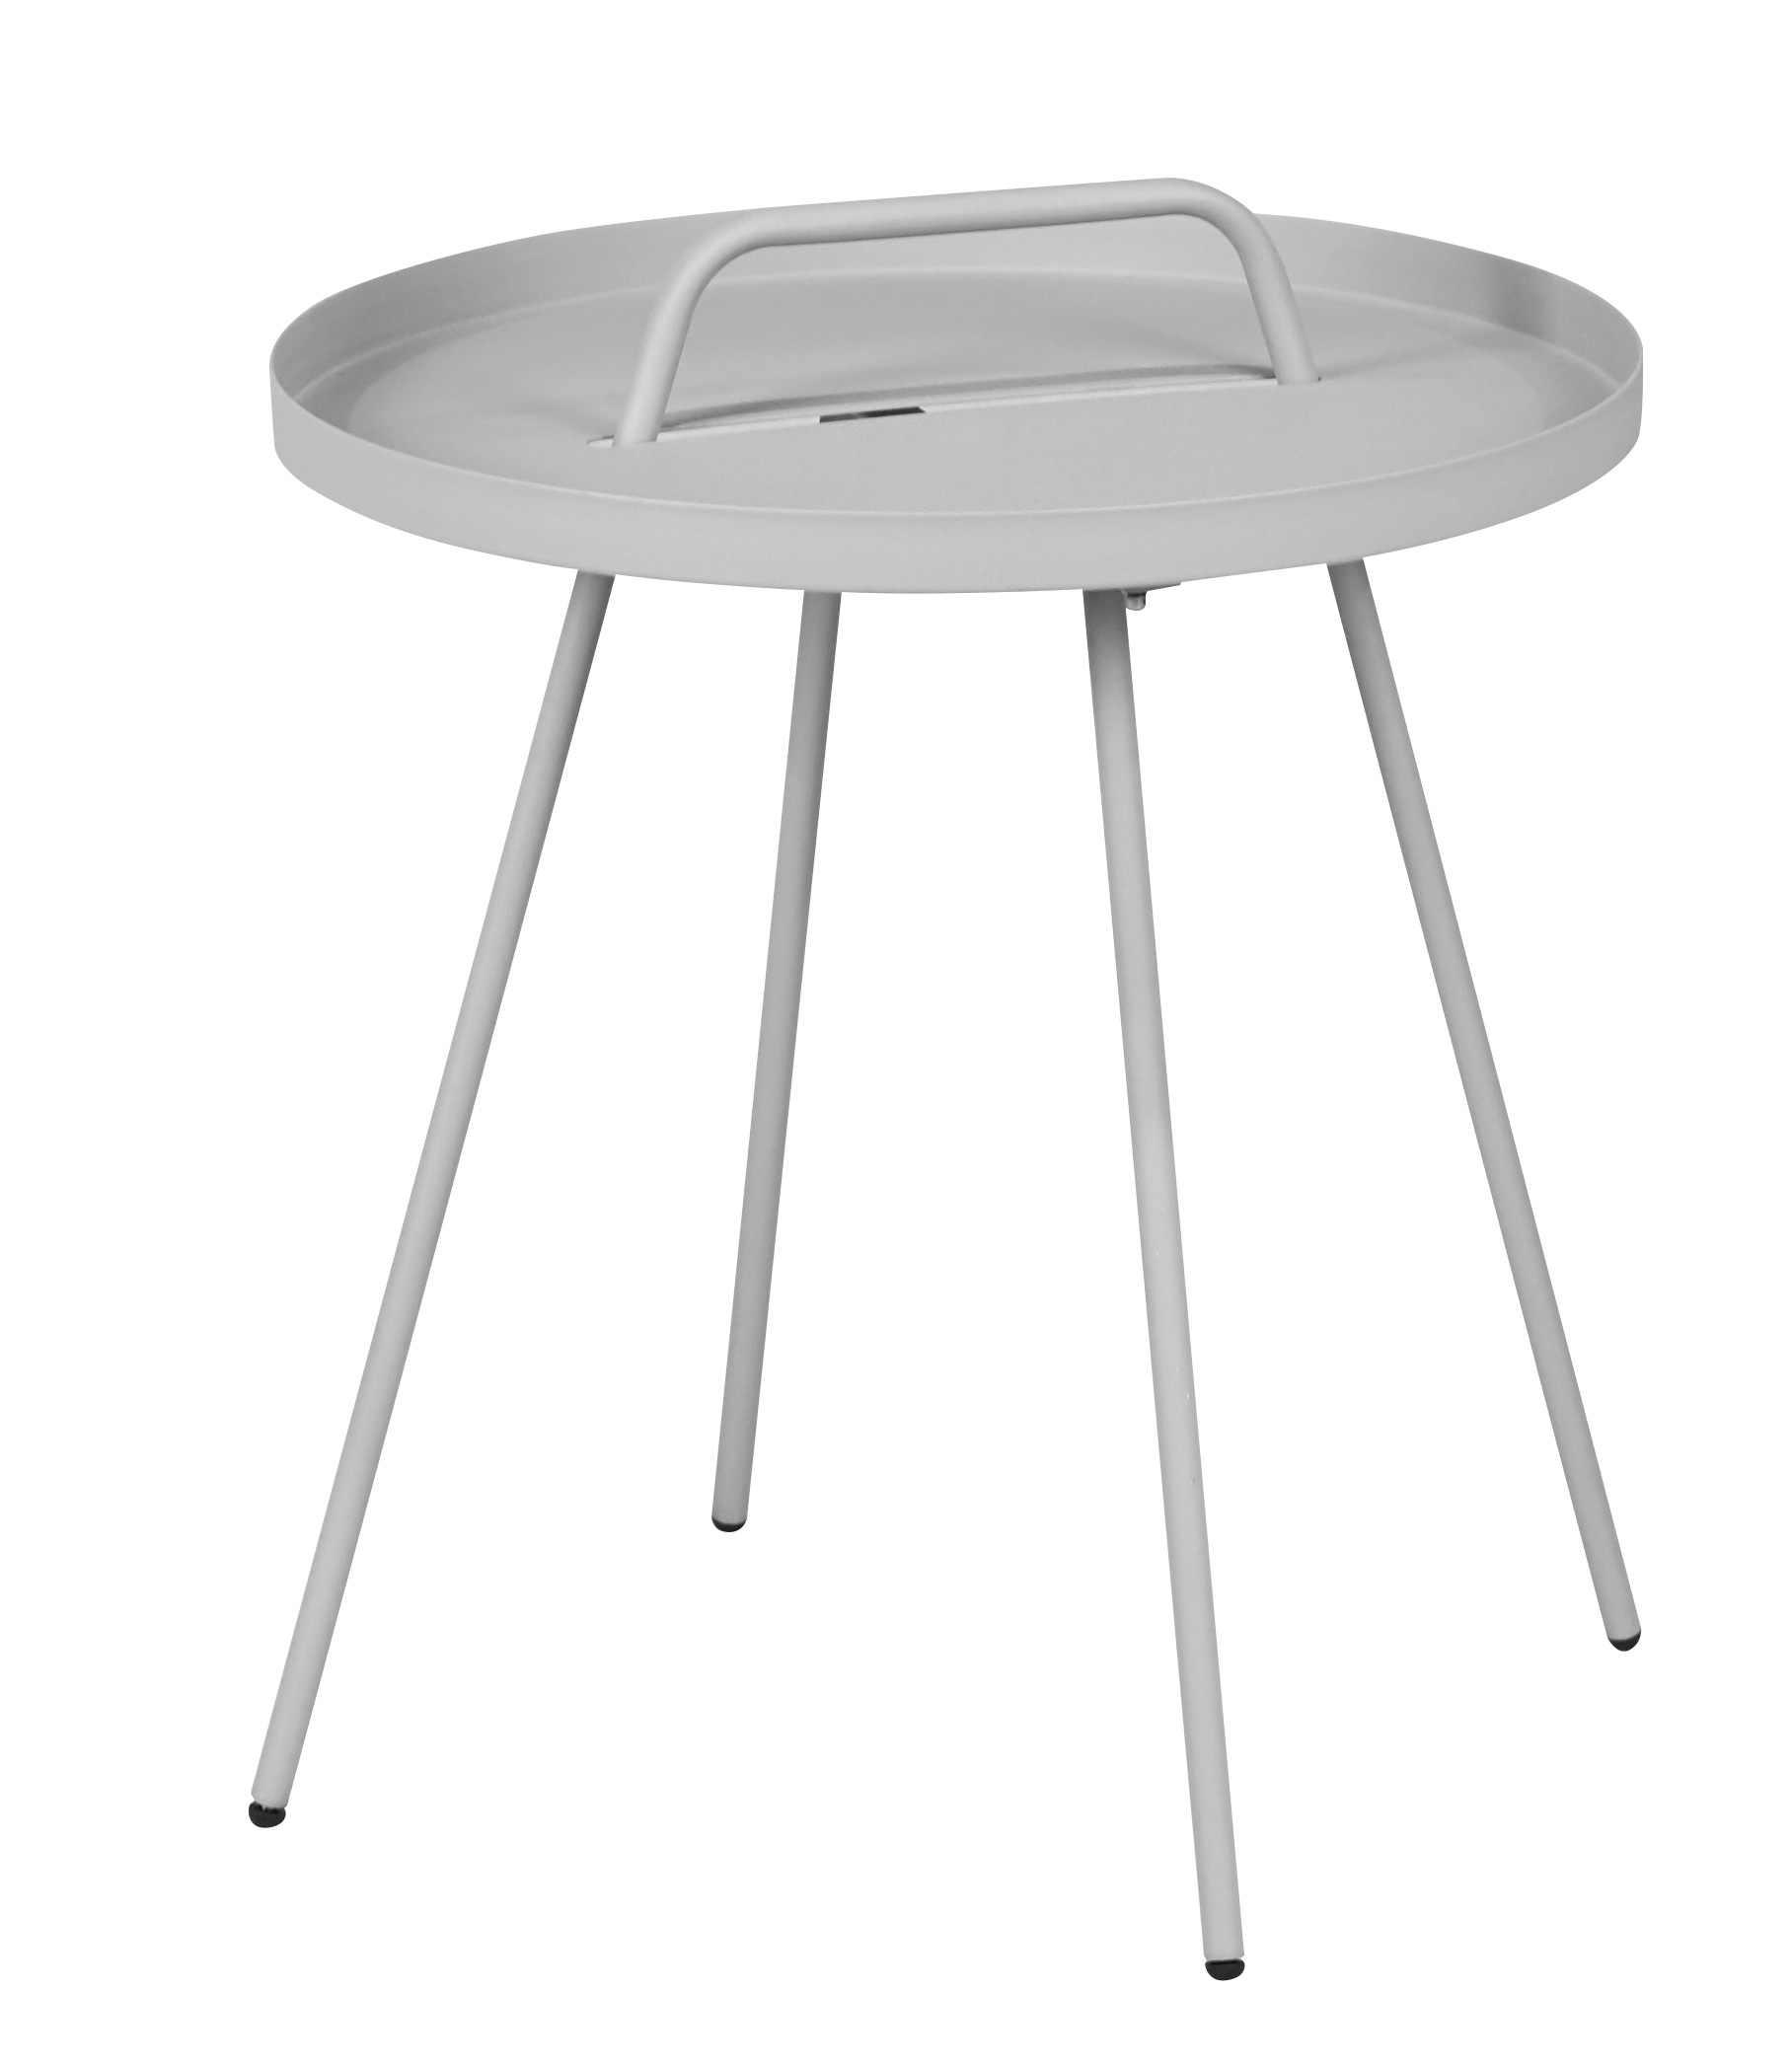 FRUIT TABLE ROUND COOL GREY